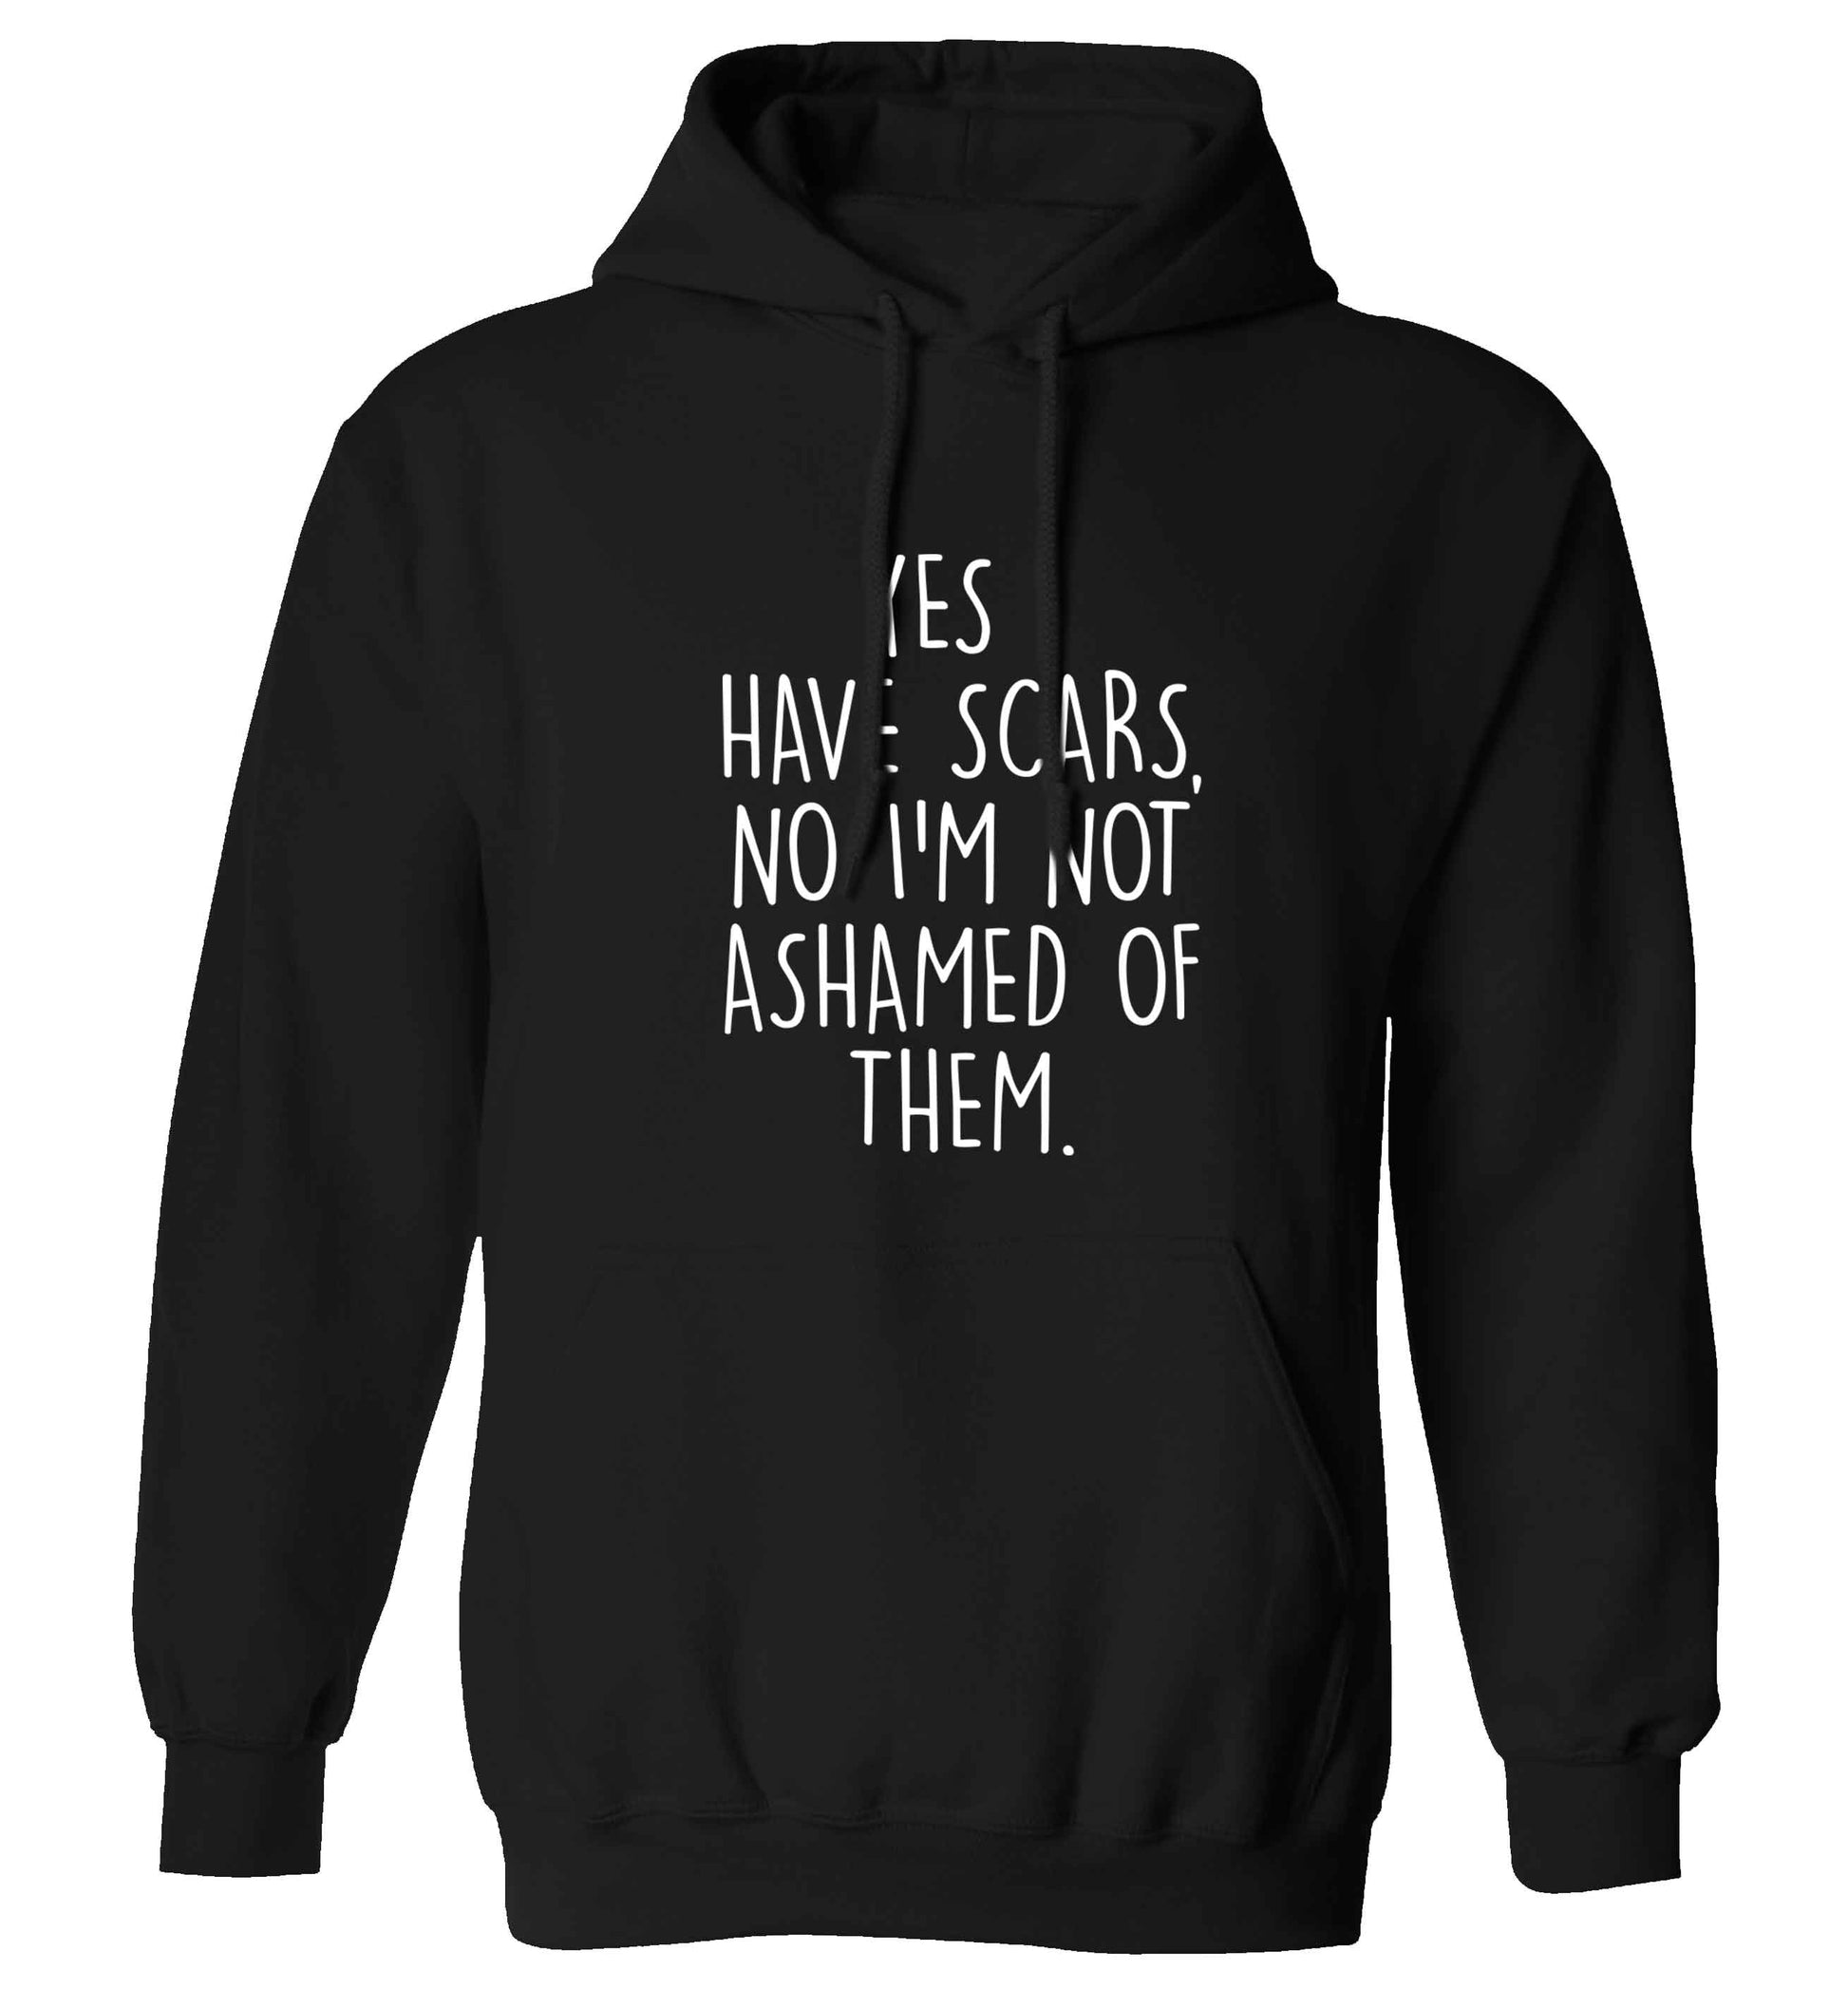 Yes I have scars, no I'm not ashamed of them adults unisex black hoodie 2XL